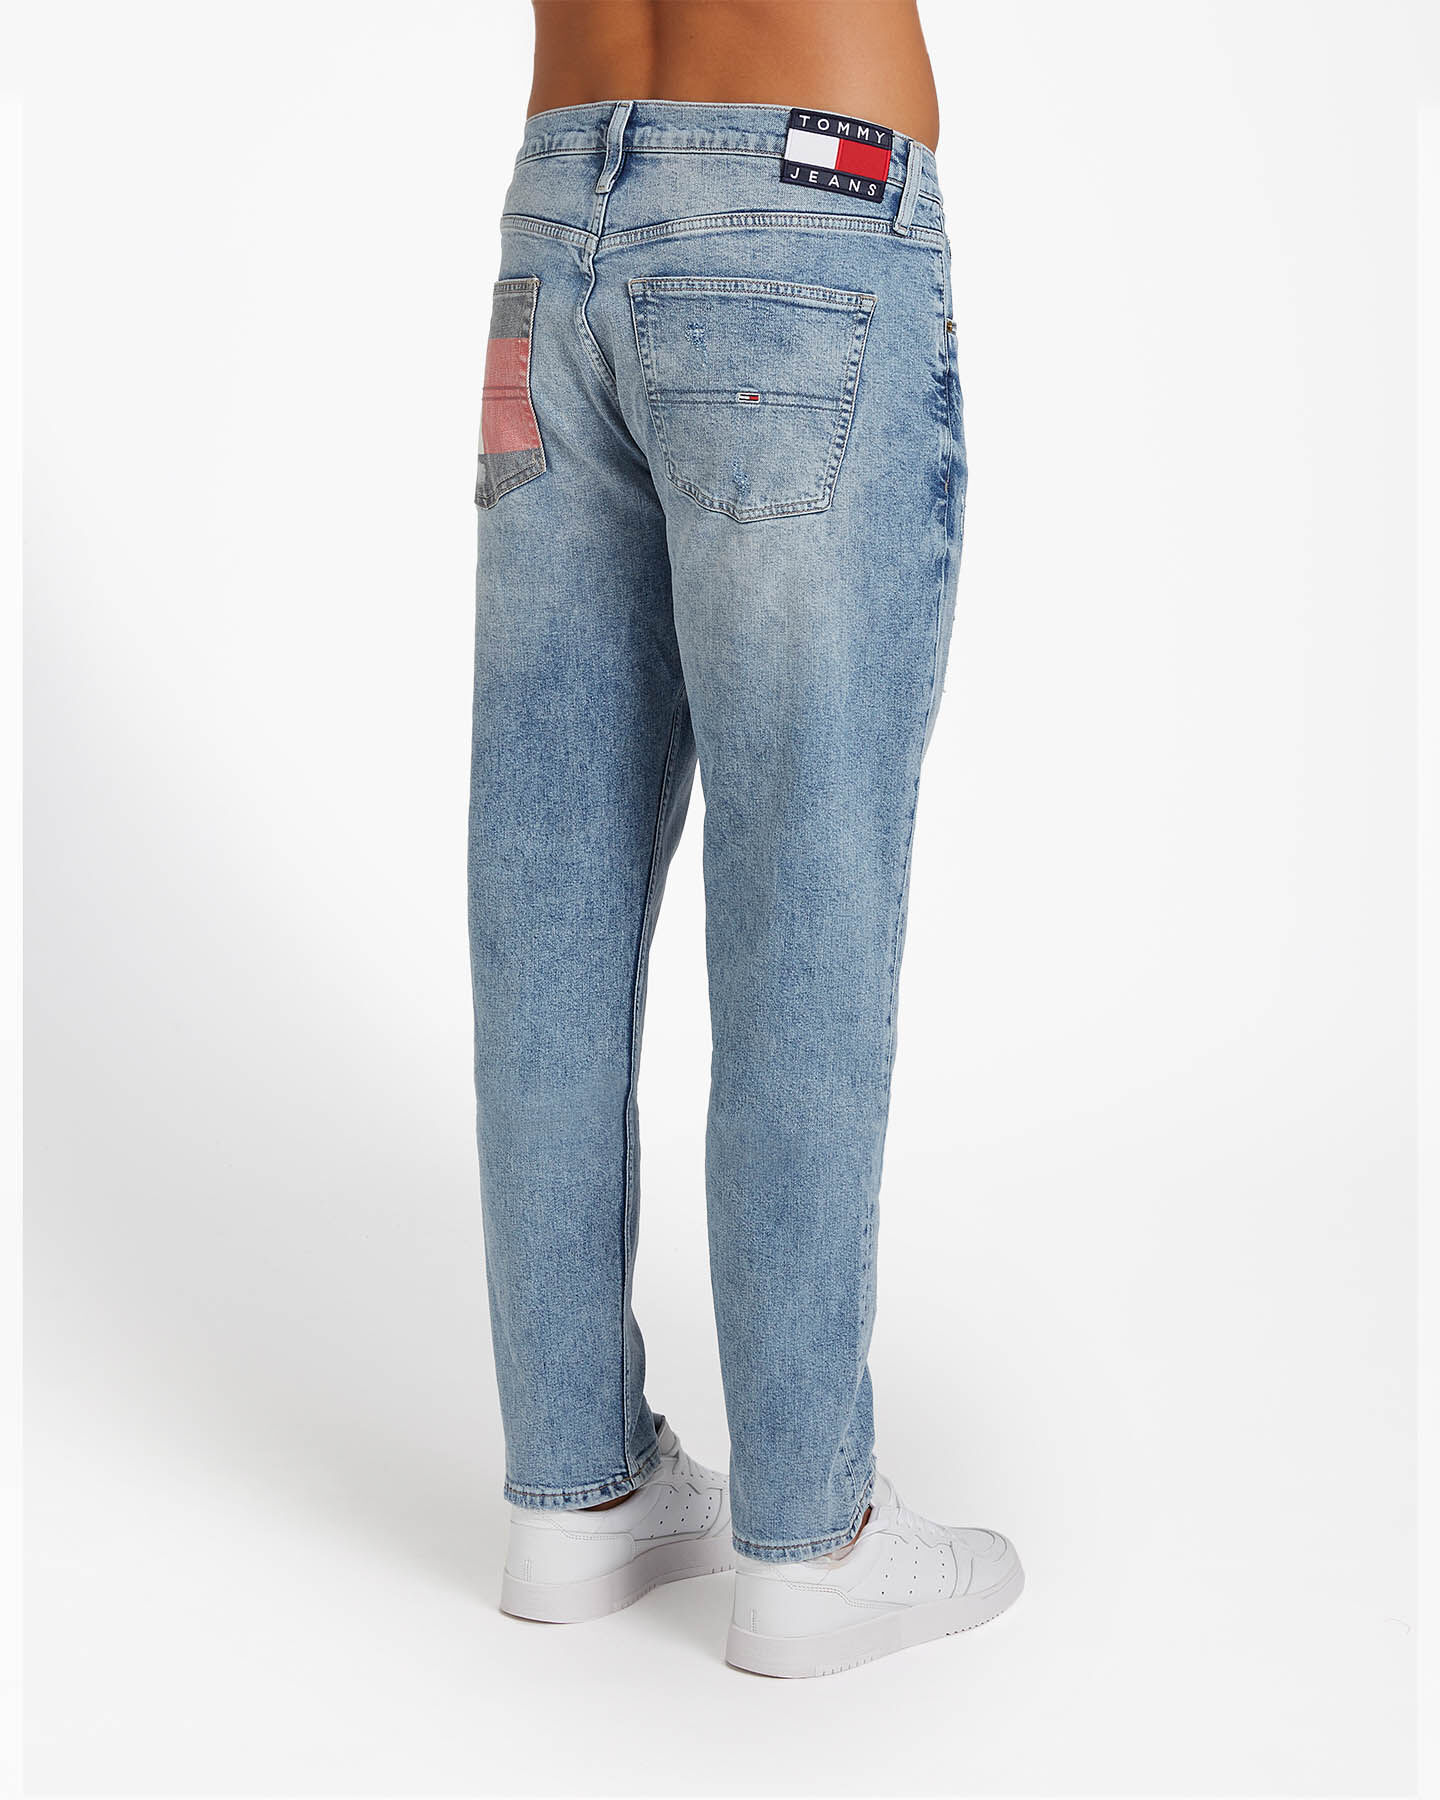  Jeans TOMMY HILFIGER REY M S4082067|1CE|28 scatto 1